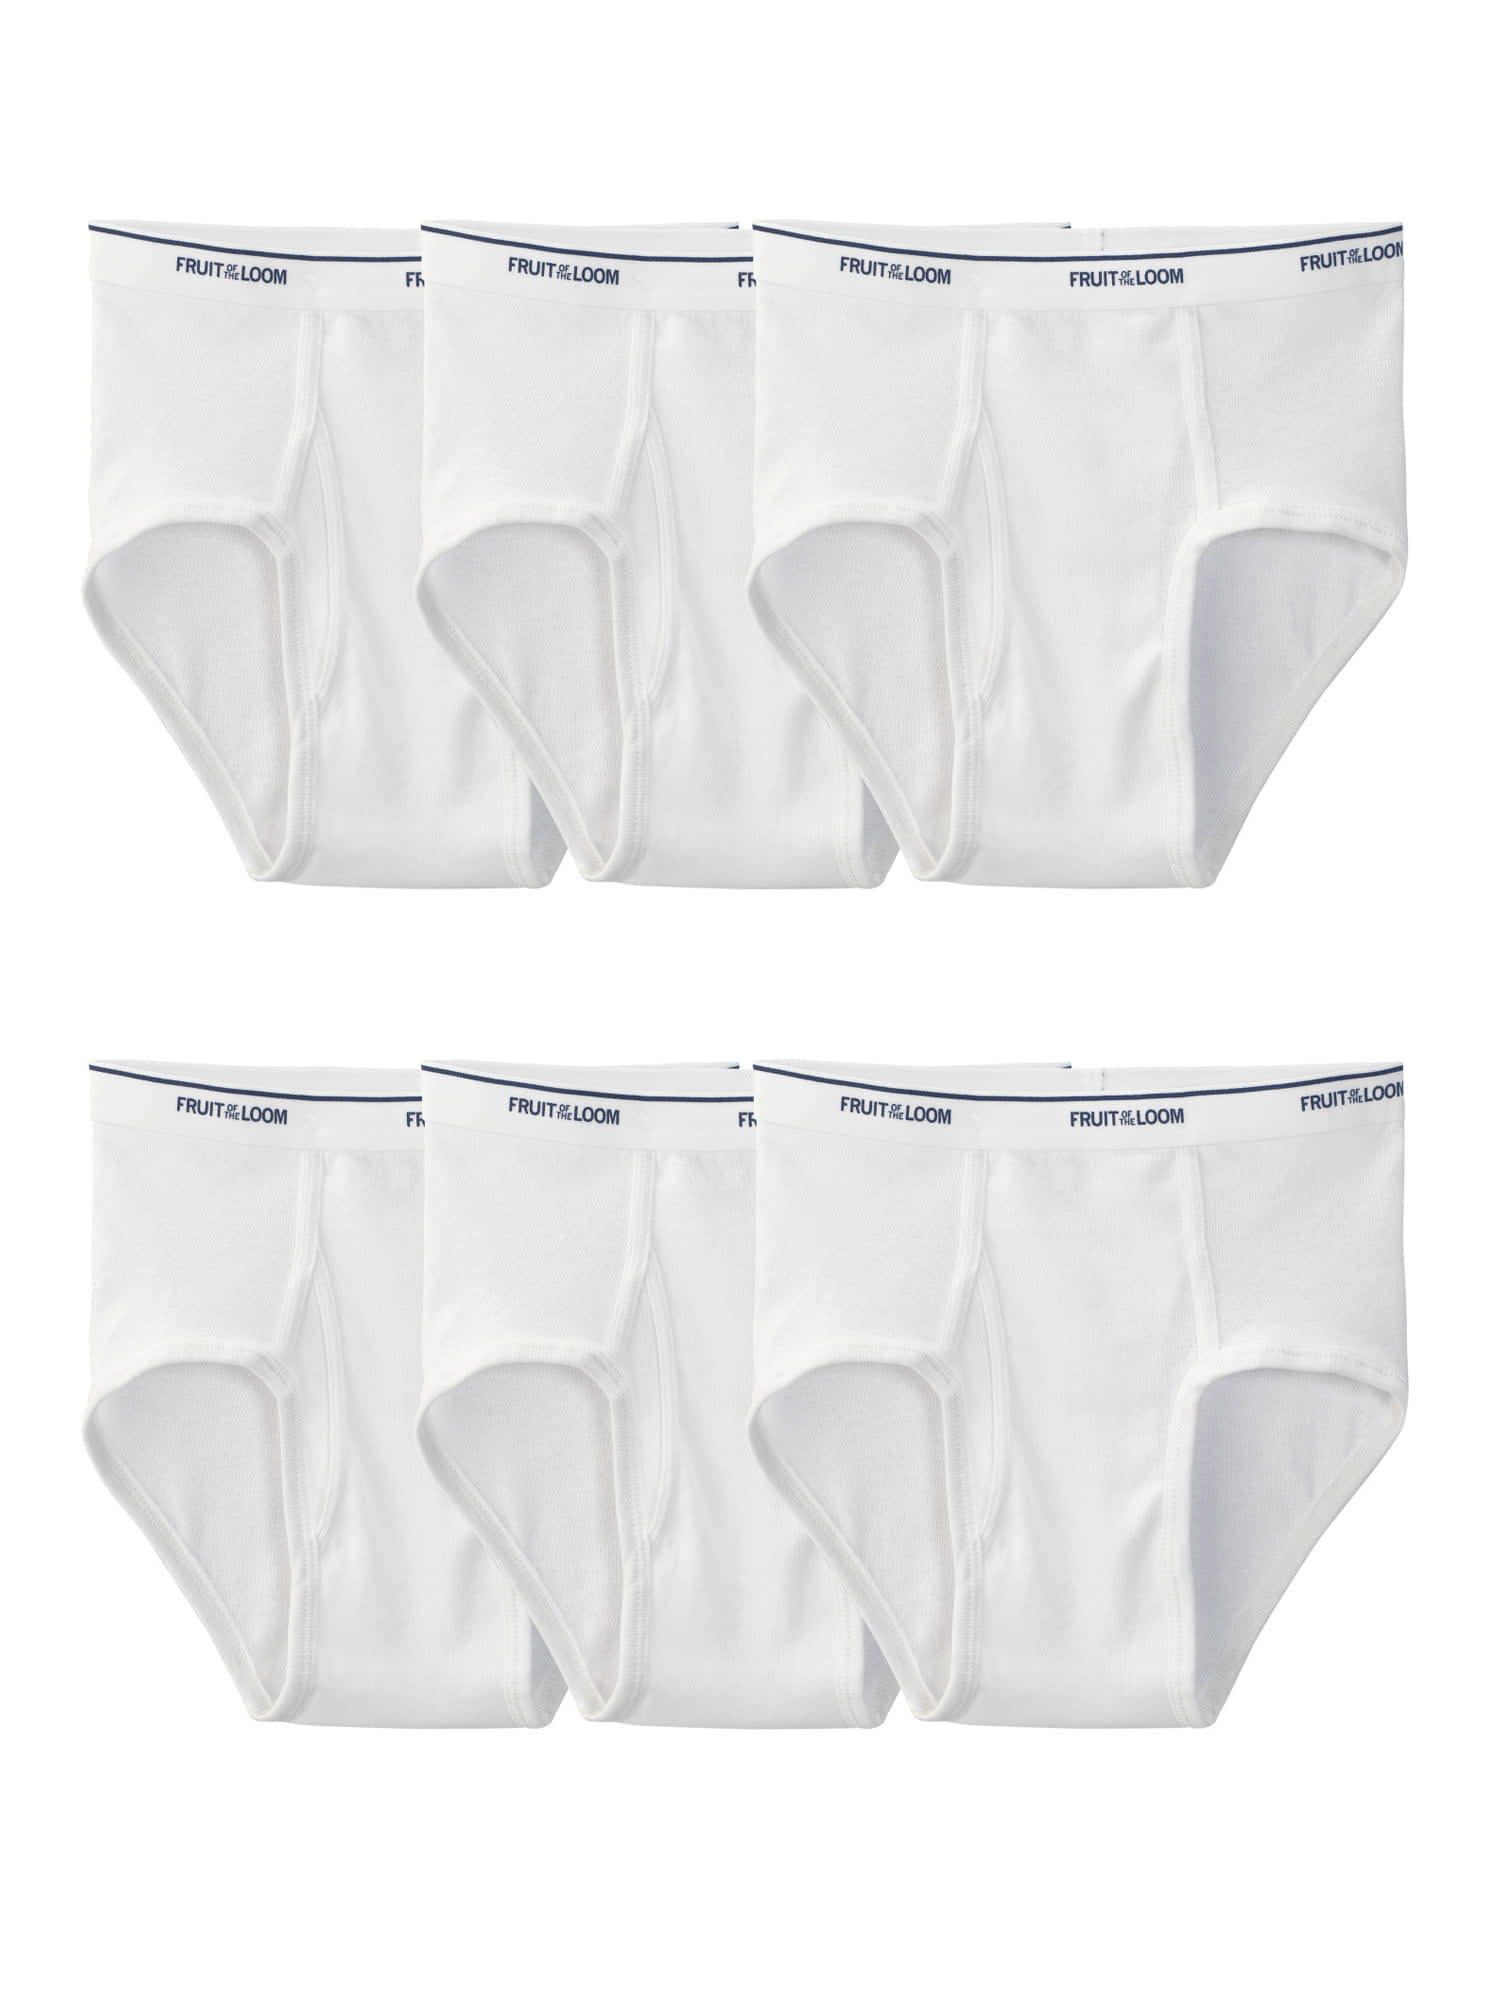 Fruit of the Loom Men's White Briefs, 6 Pack, Sizes S-3XL - DroneUp Delivery